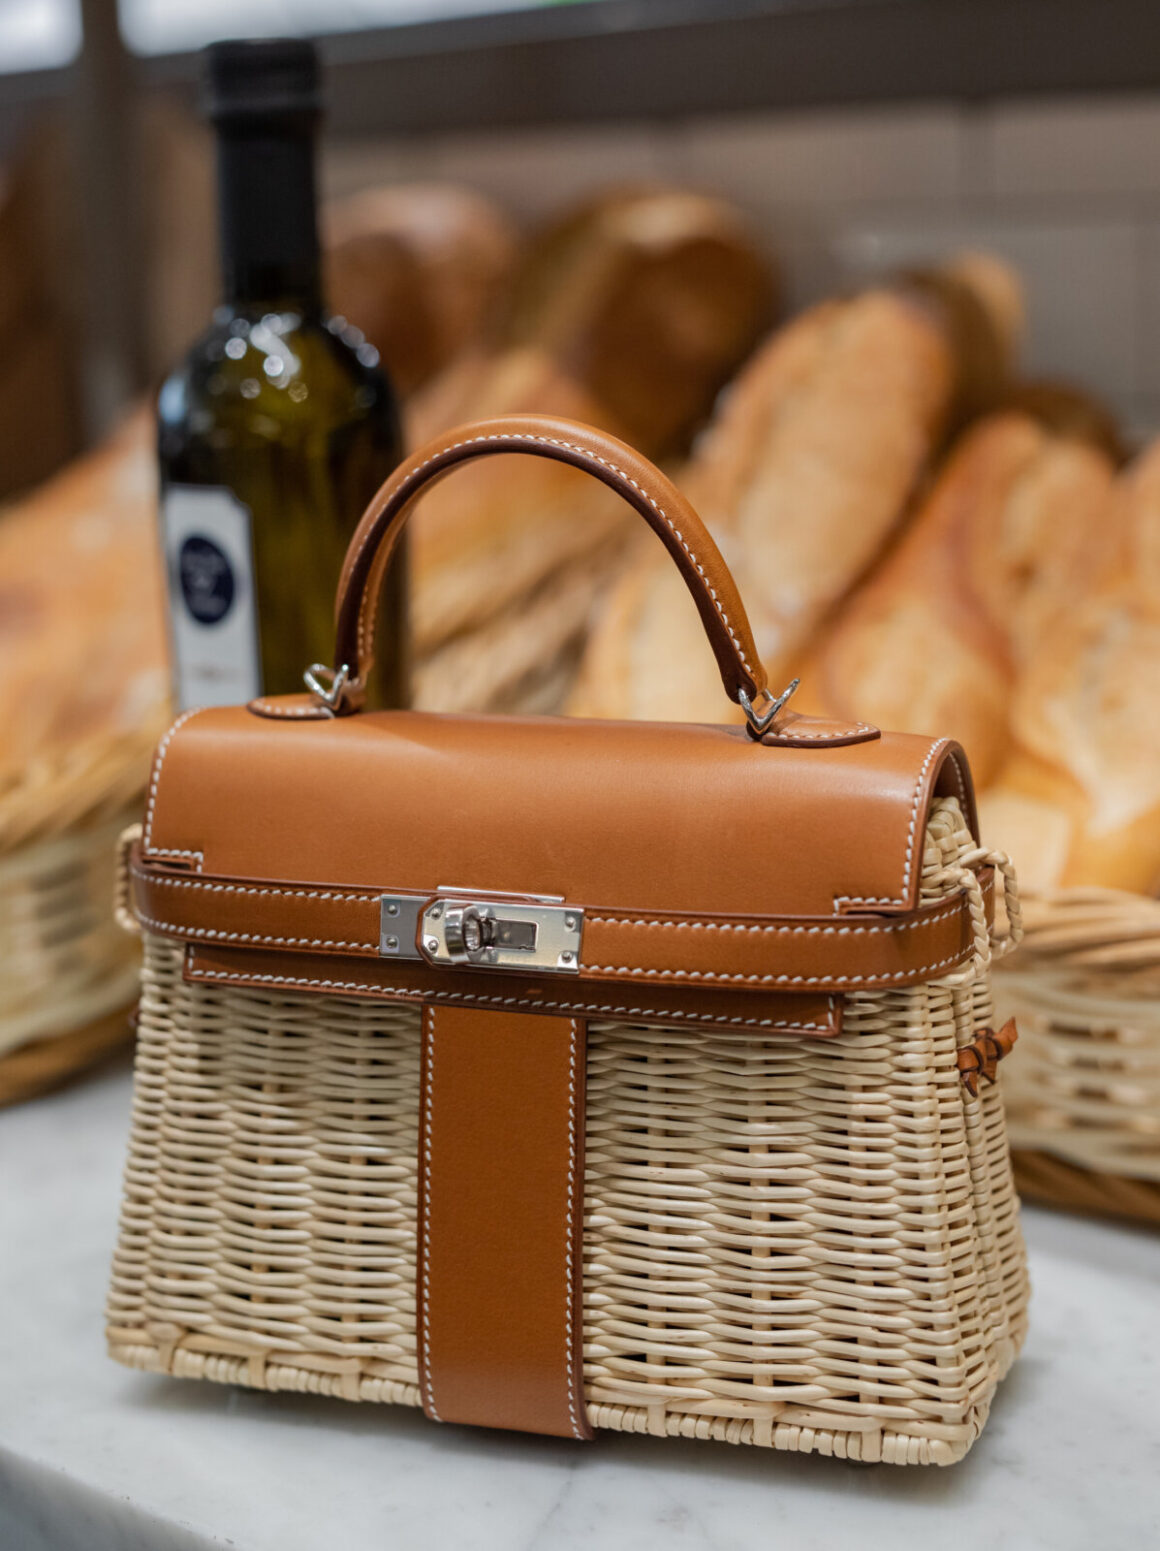 Prive Porter: Maintenance and Care Tips for Hermès Birkin and